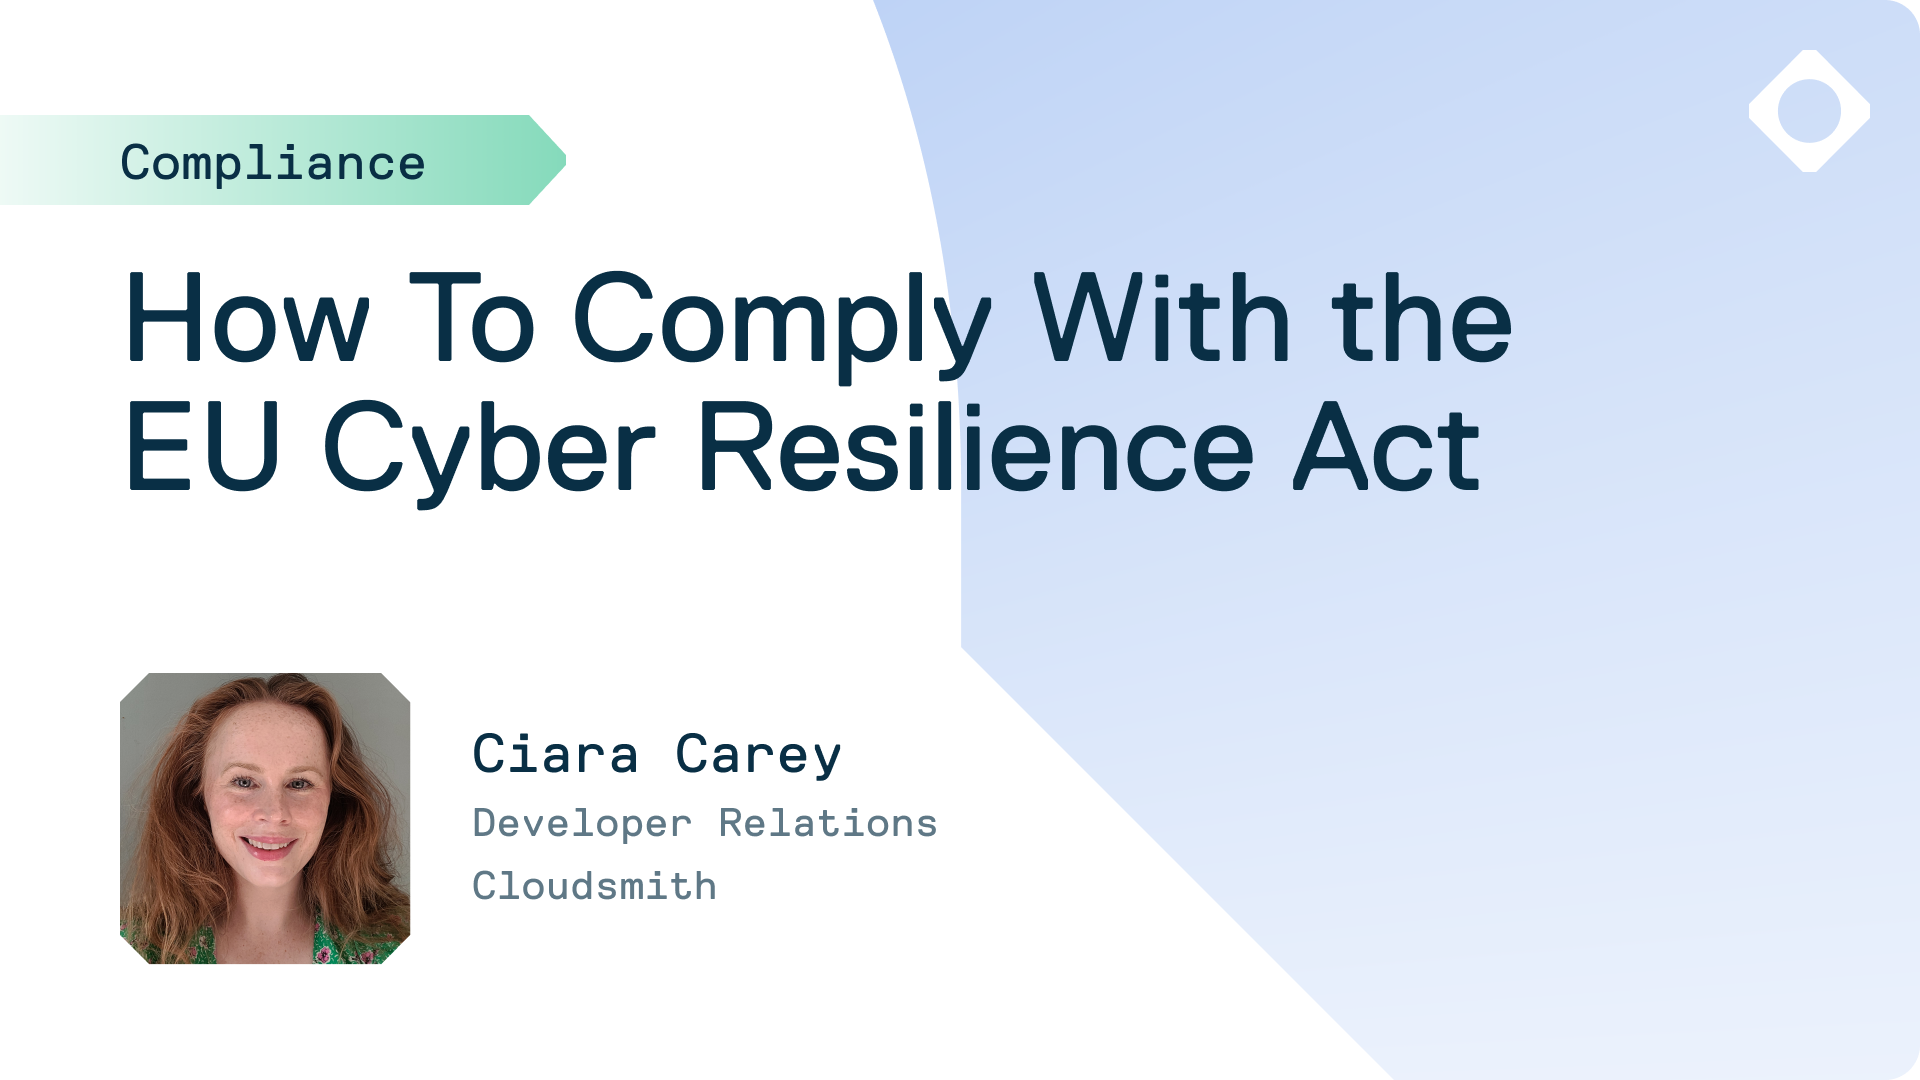 How to comply with the EU Cyber Resilience Act